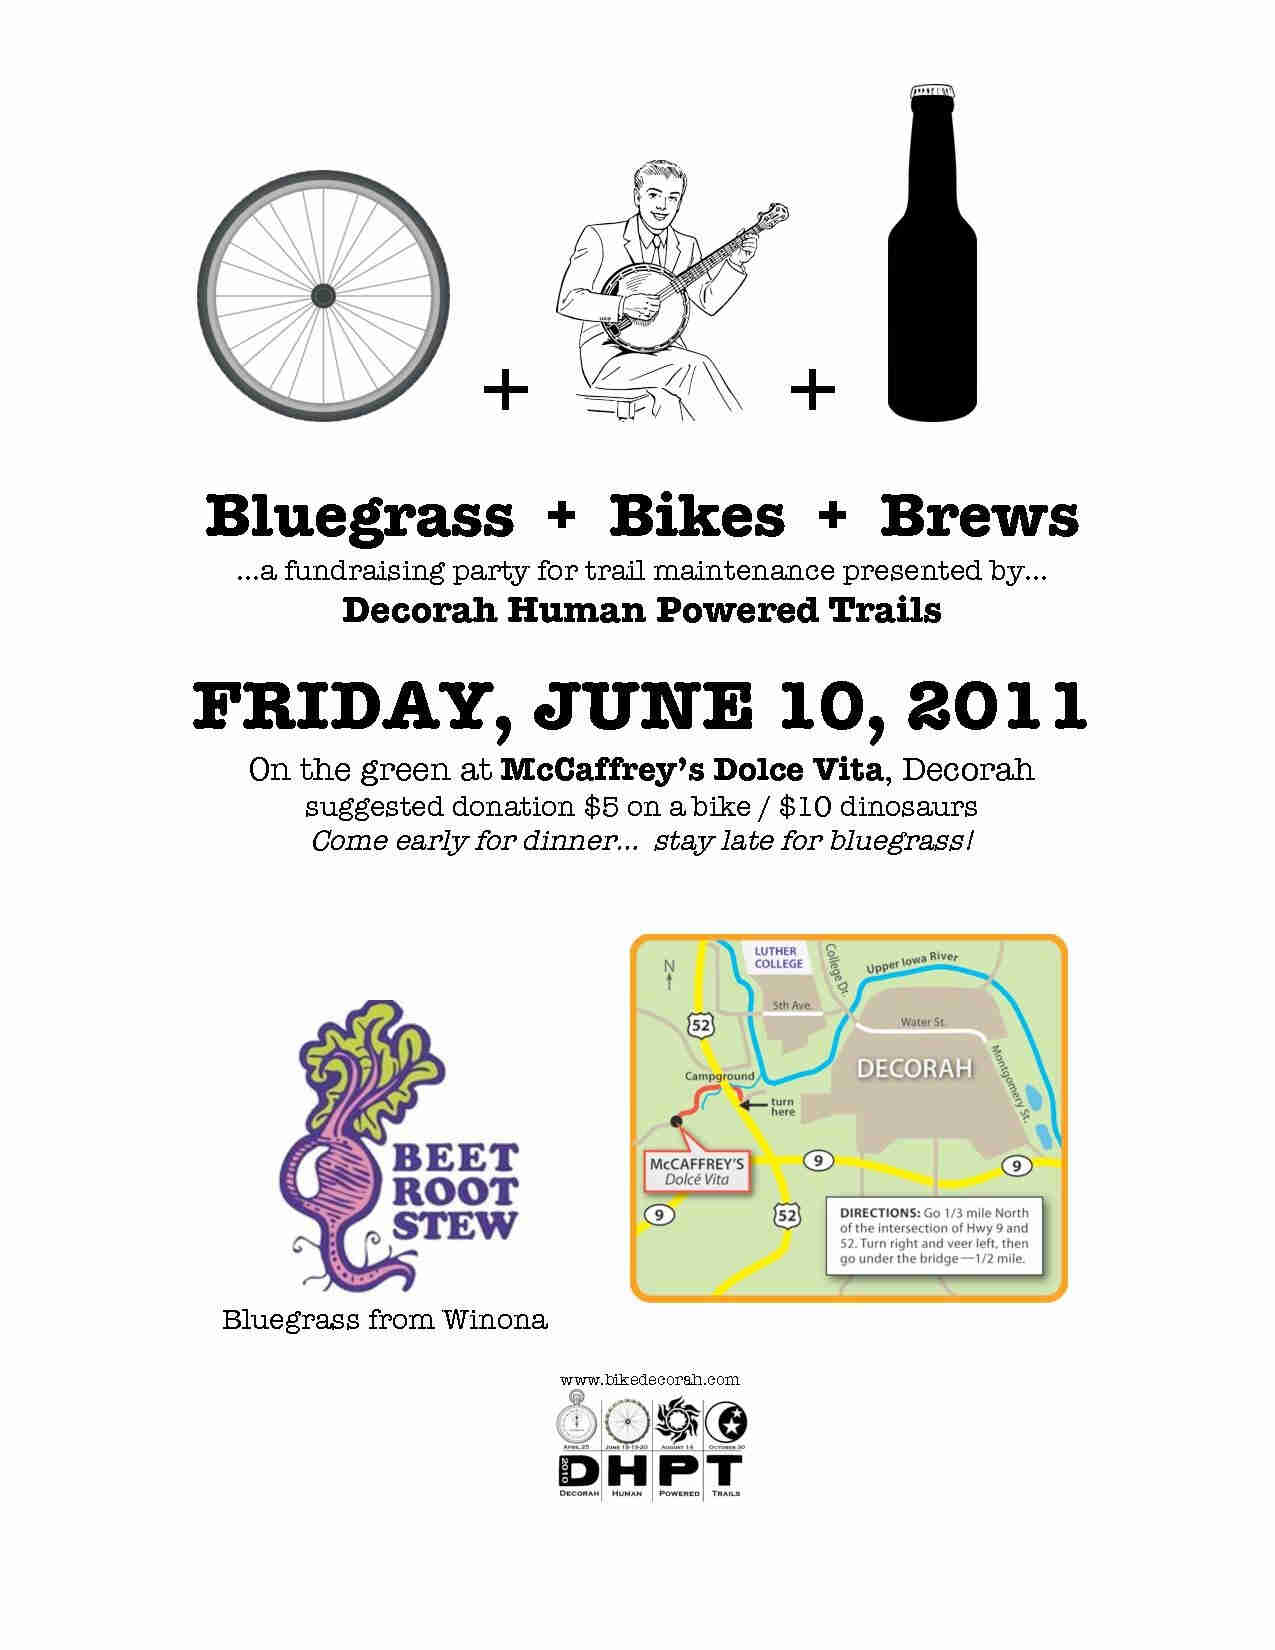 Graphically illustrated poster for the Bluegrass + Bikes + Brews biking event